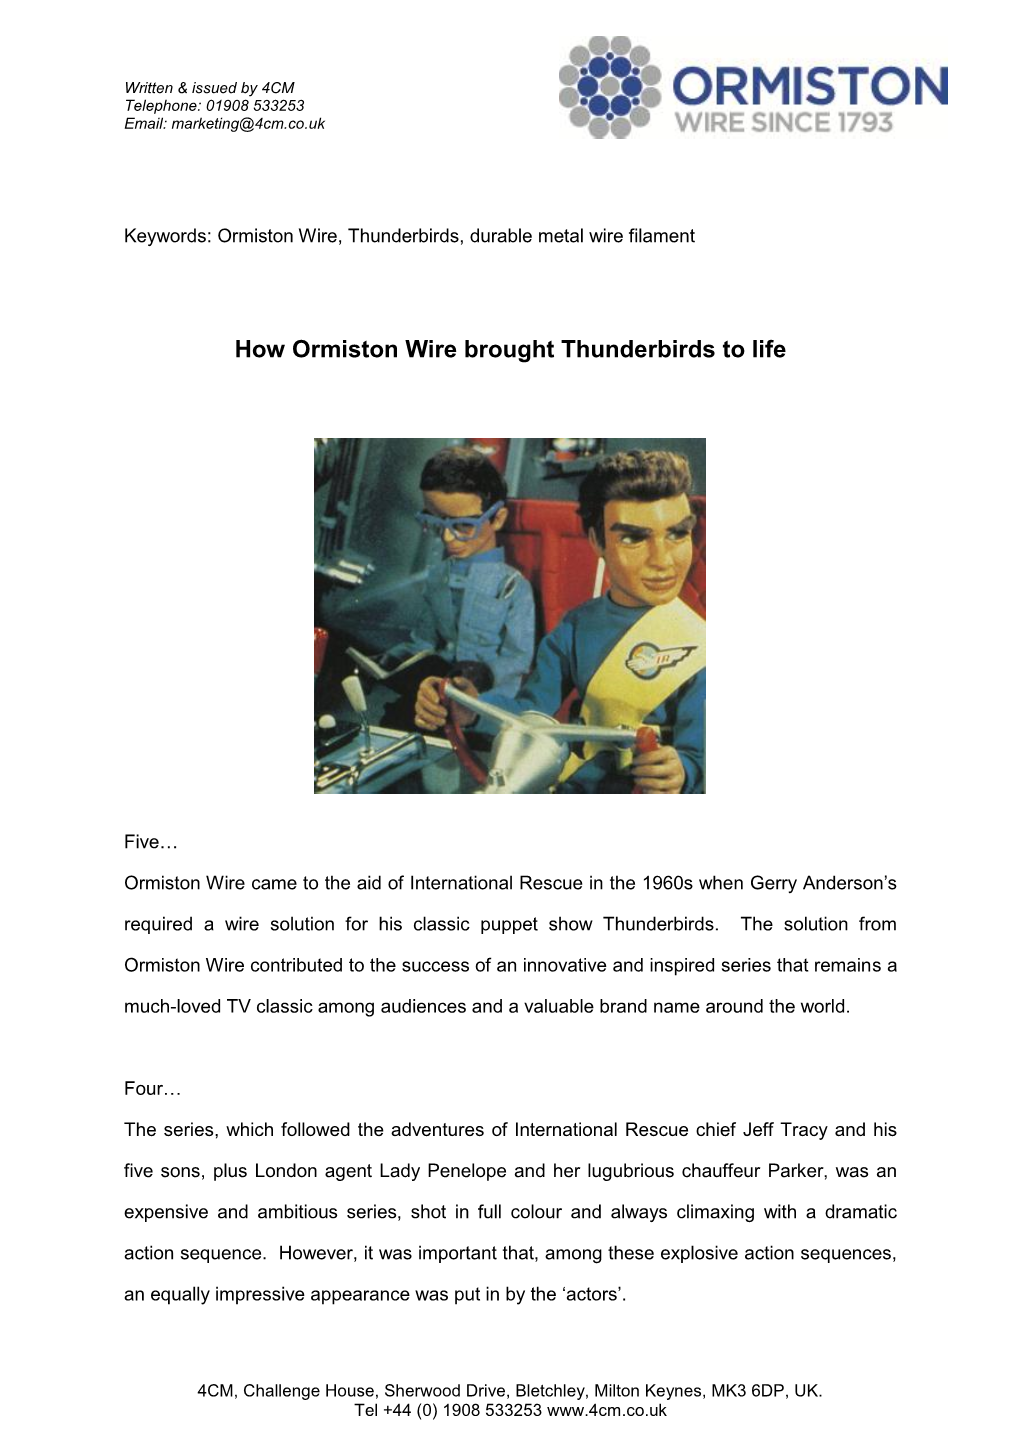 How Ormiston Wire Brought Thunderbirds to Life